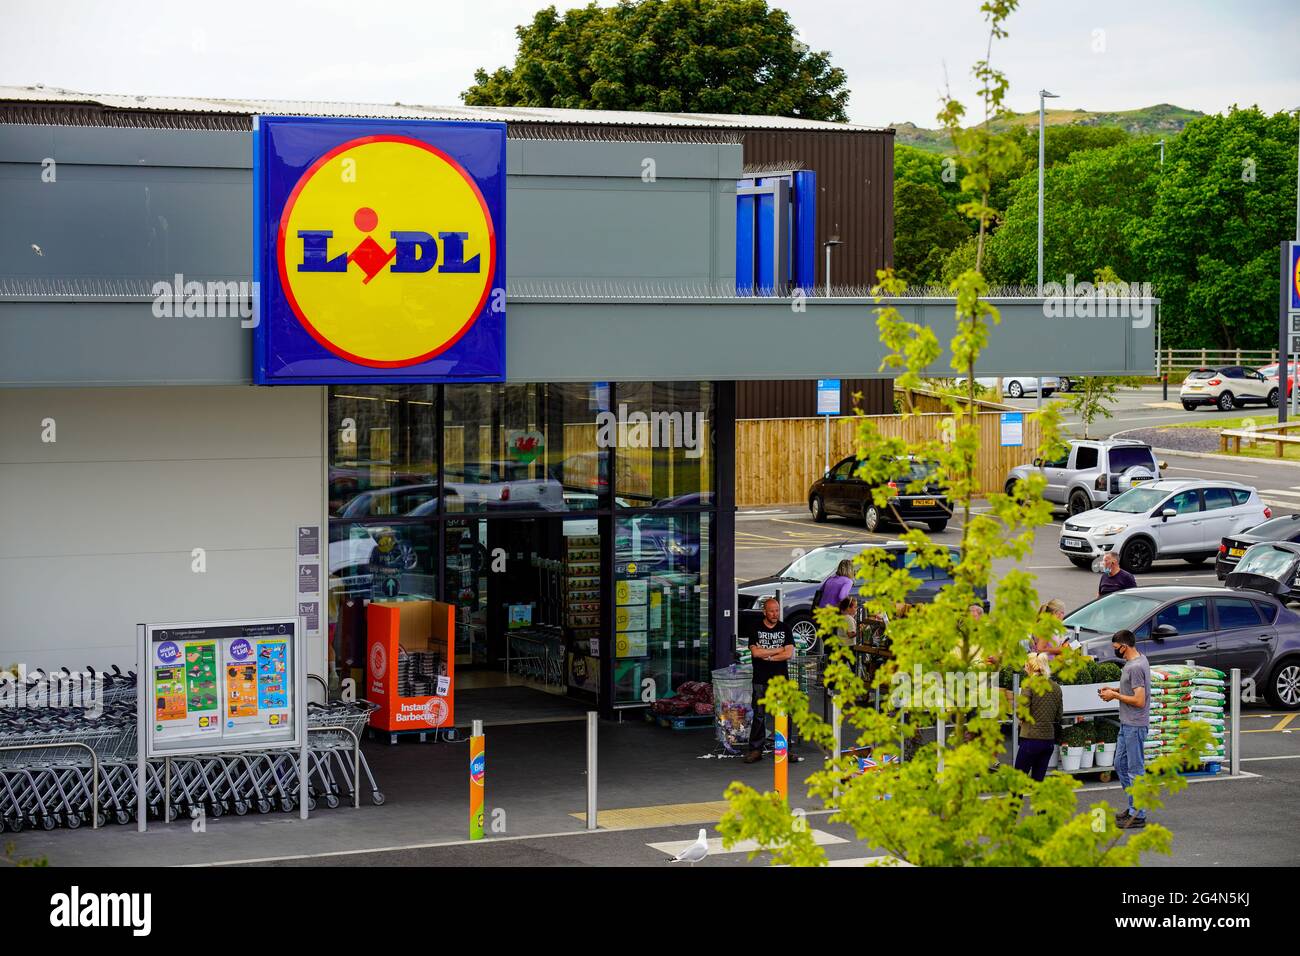 Lidl super market entrance and signage people parking cars in car park Wales UK Stock Photo